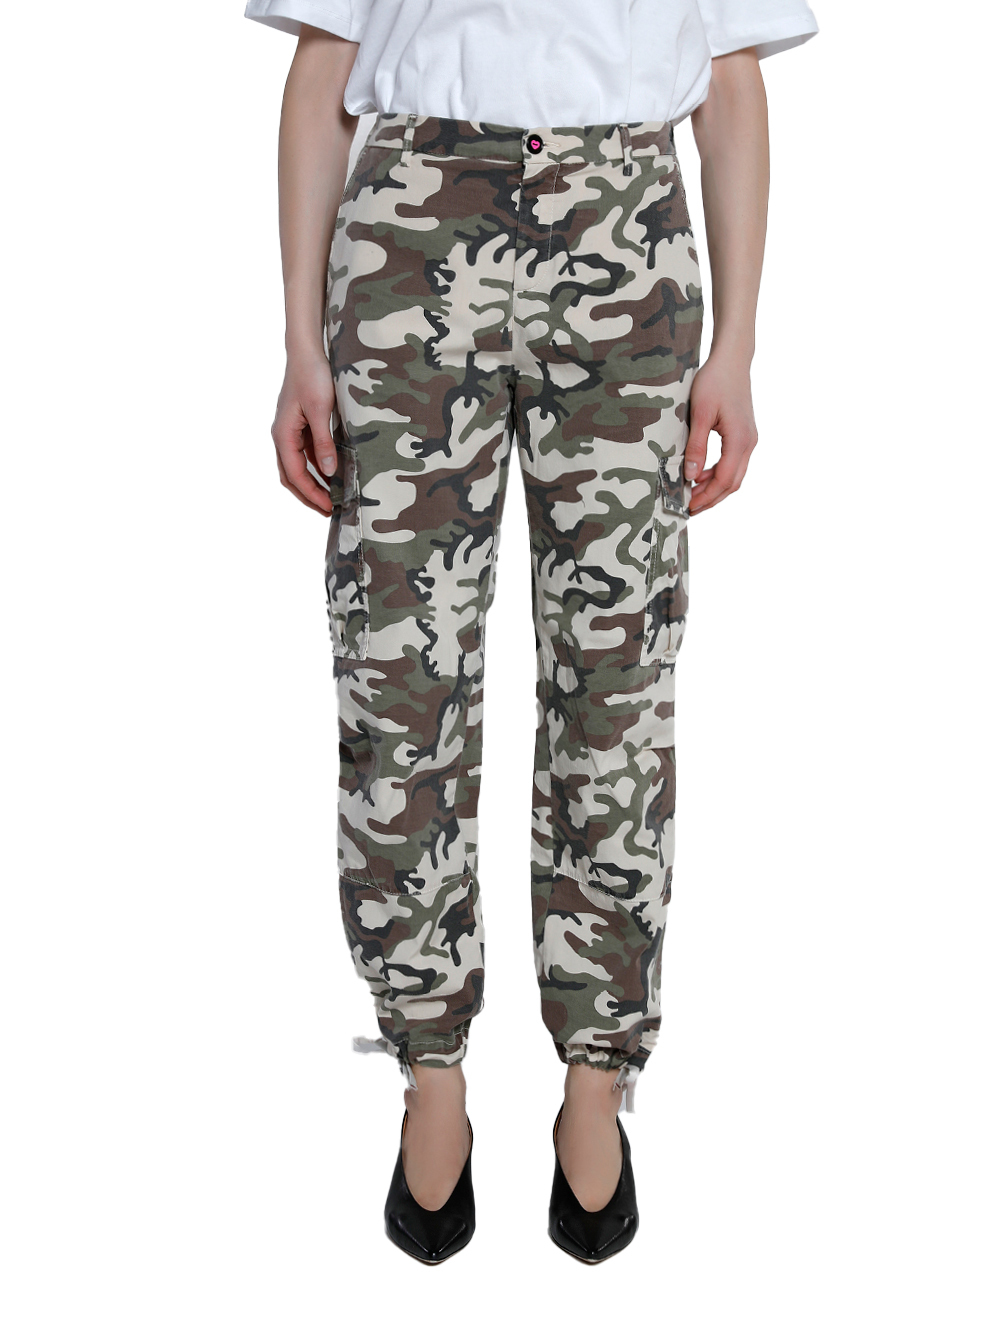 I Love My Pants I LOVE MY PANTS- Cotton Cargo Camouflage Trousers